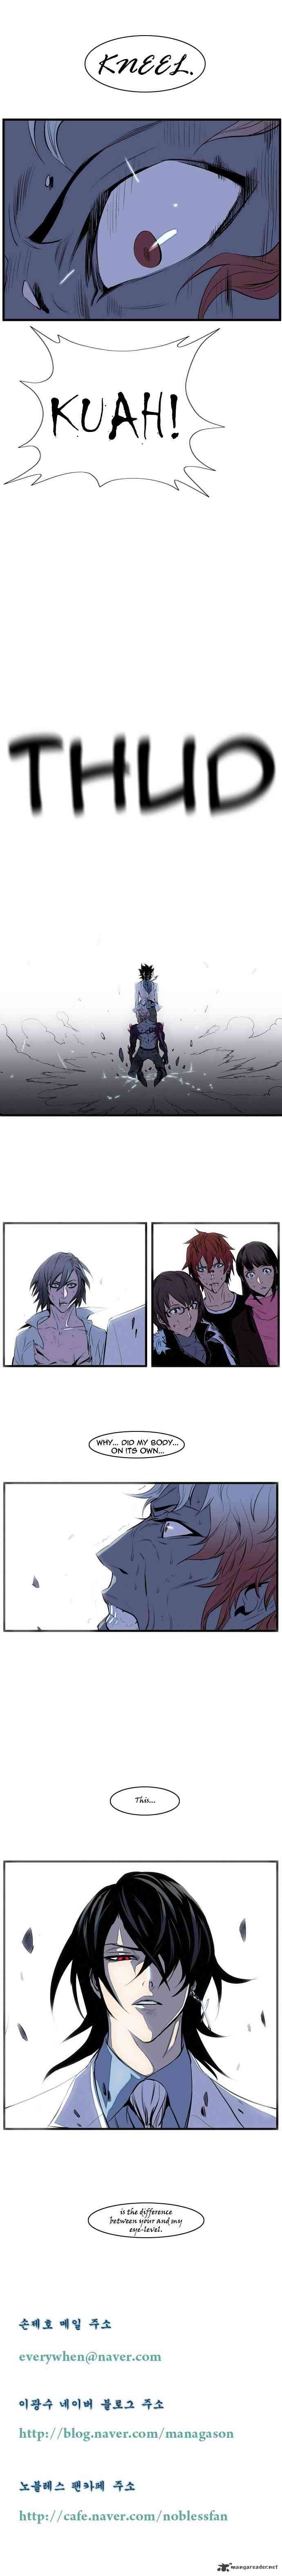 Noblesse Chapter 76 _ Chapters 76-90 page 7